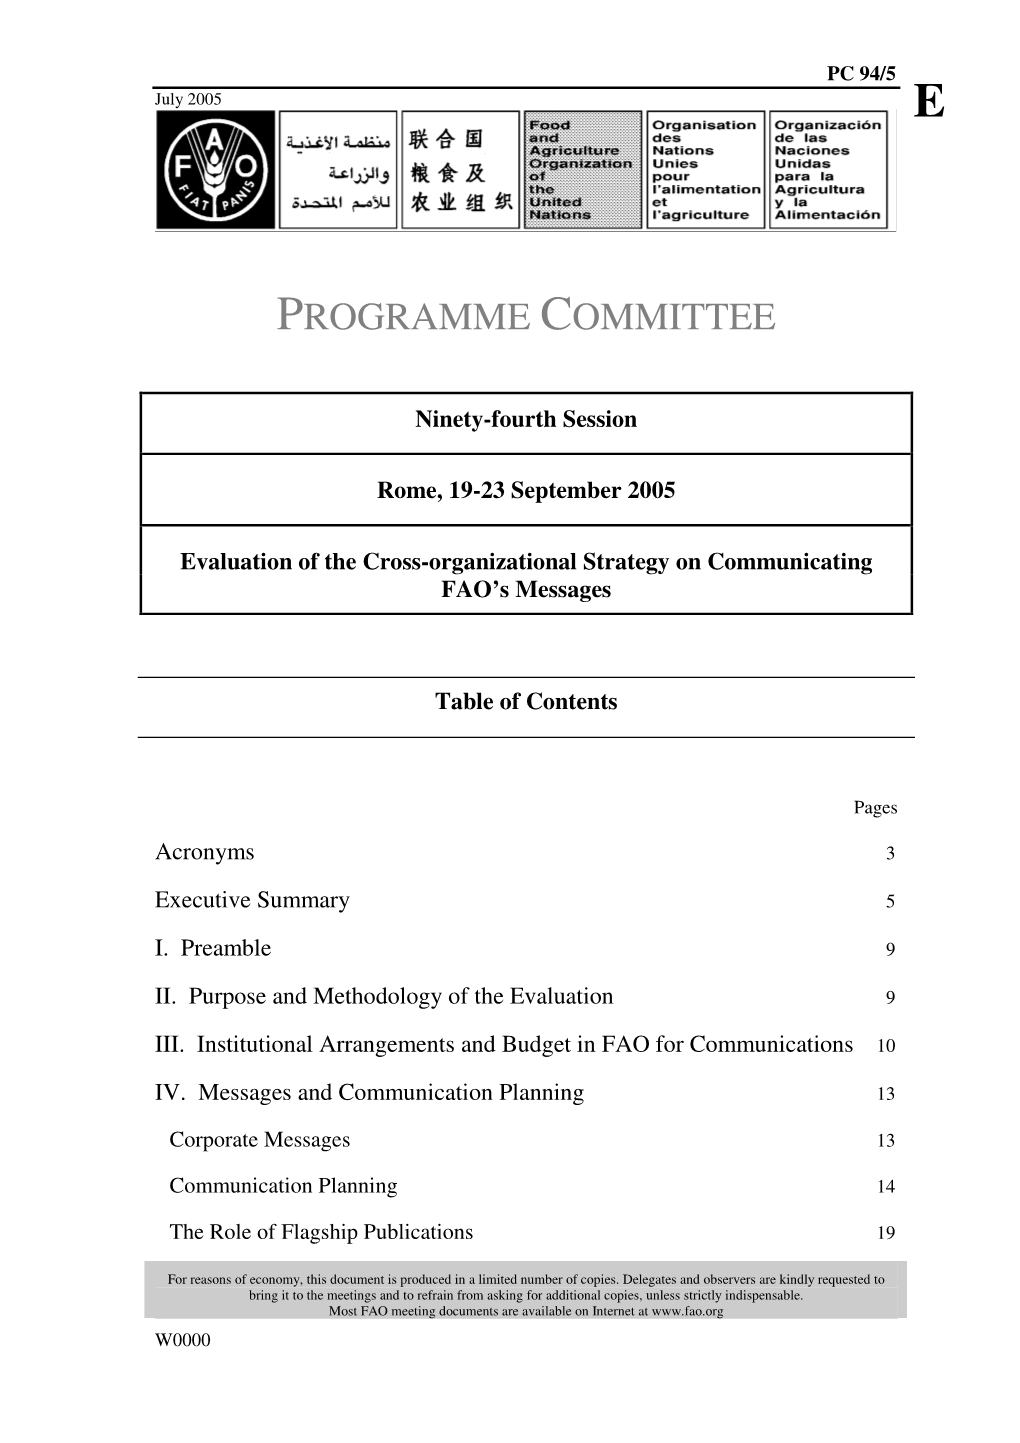 Evaluation of the Cross-Organizational Strategy on Communicating FAO’S Messages